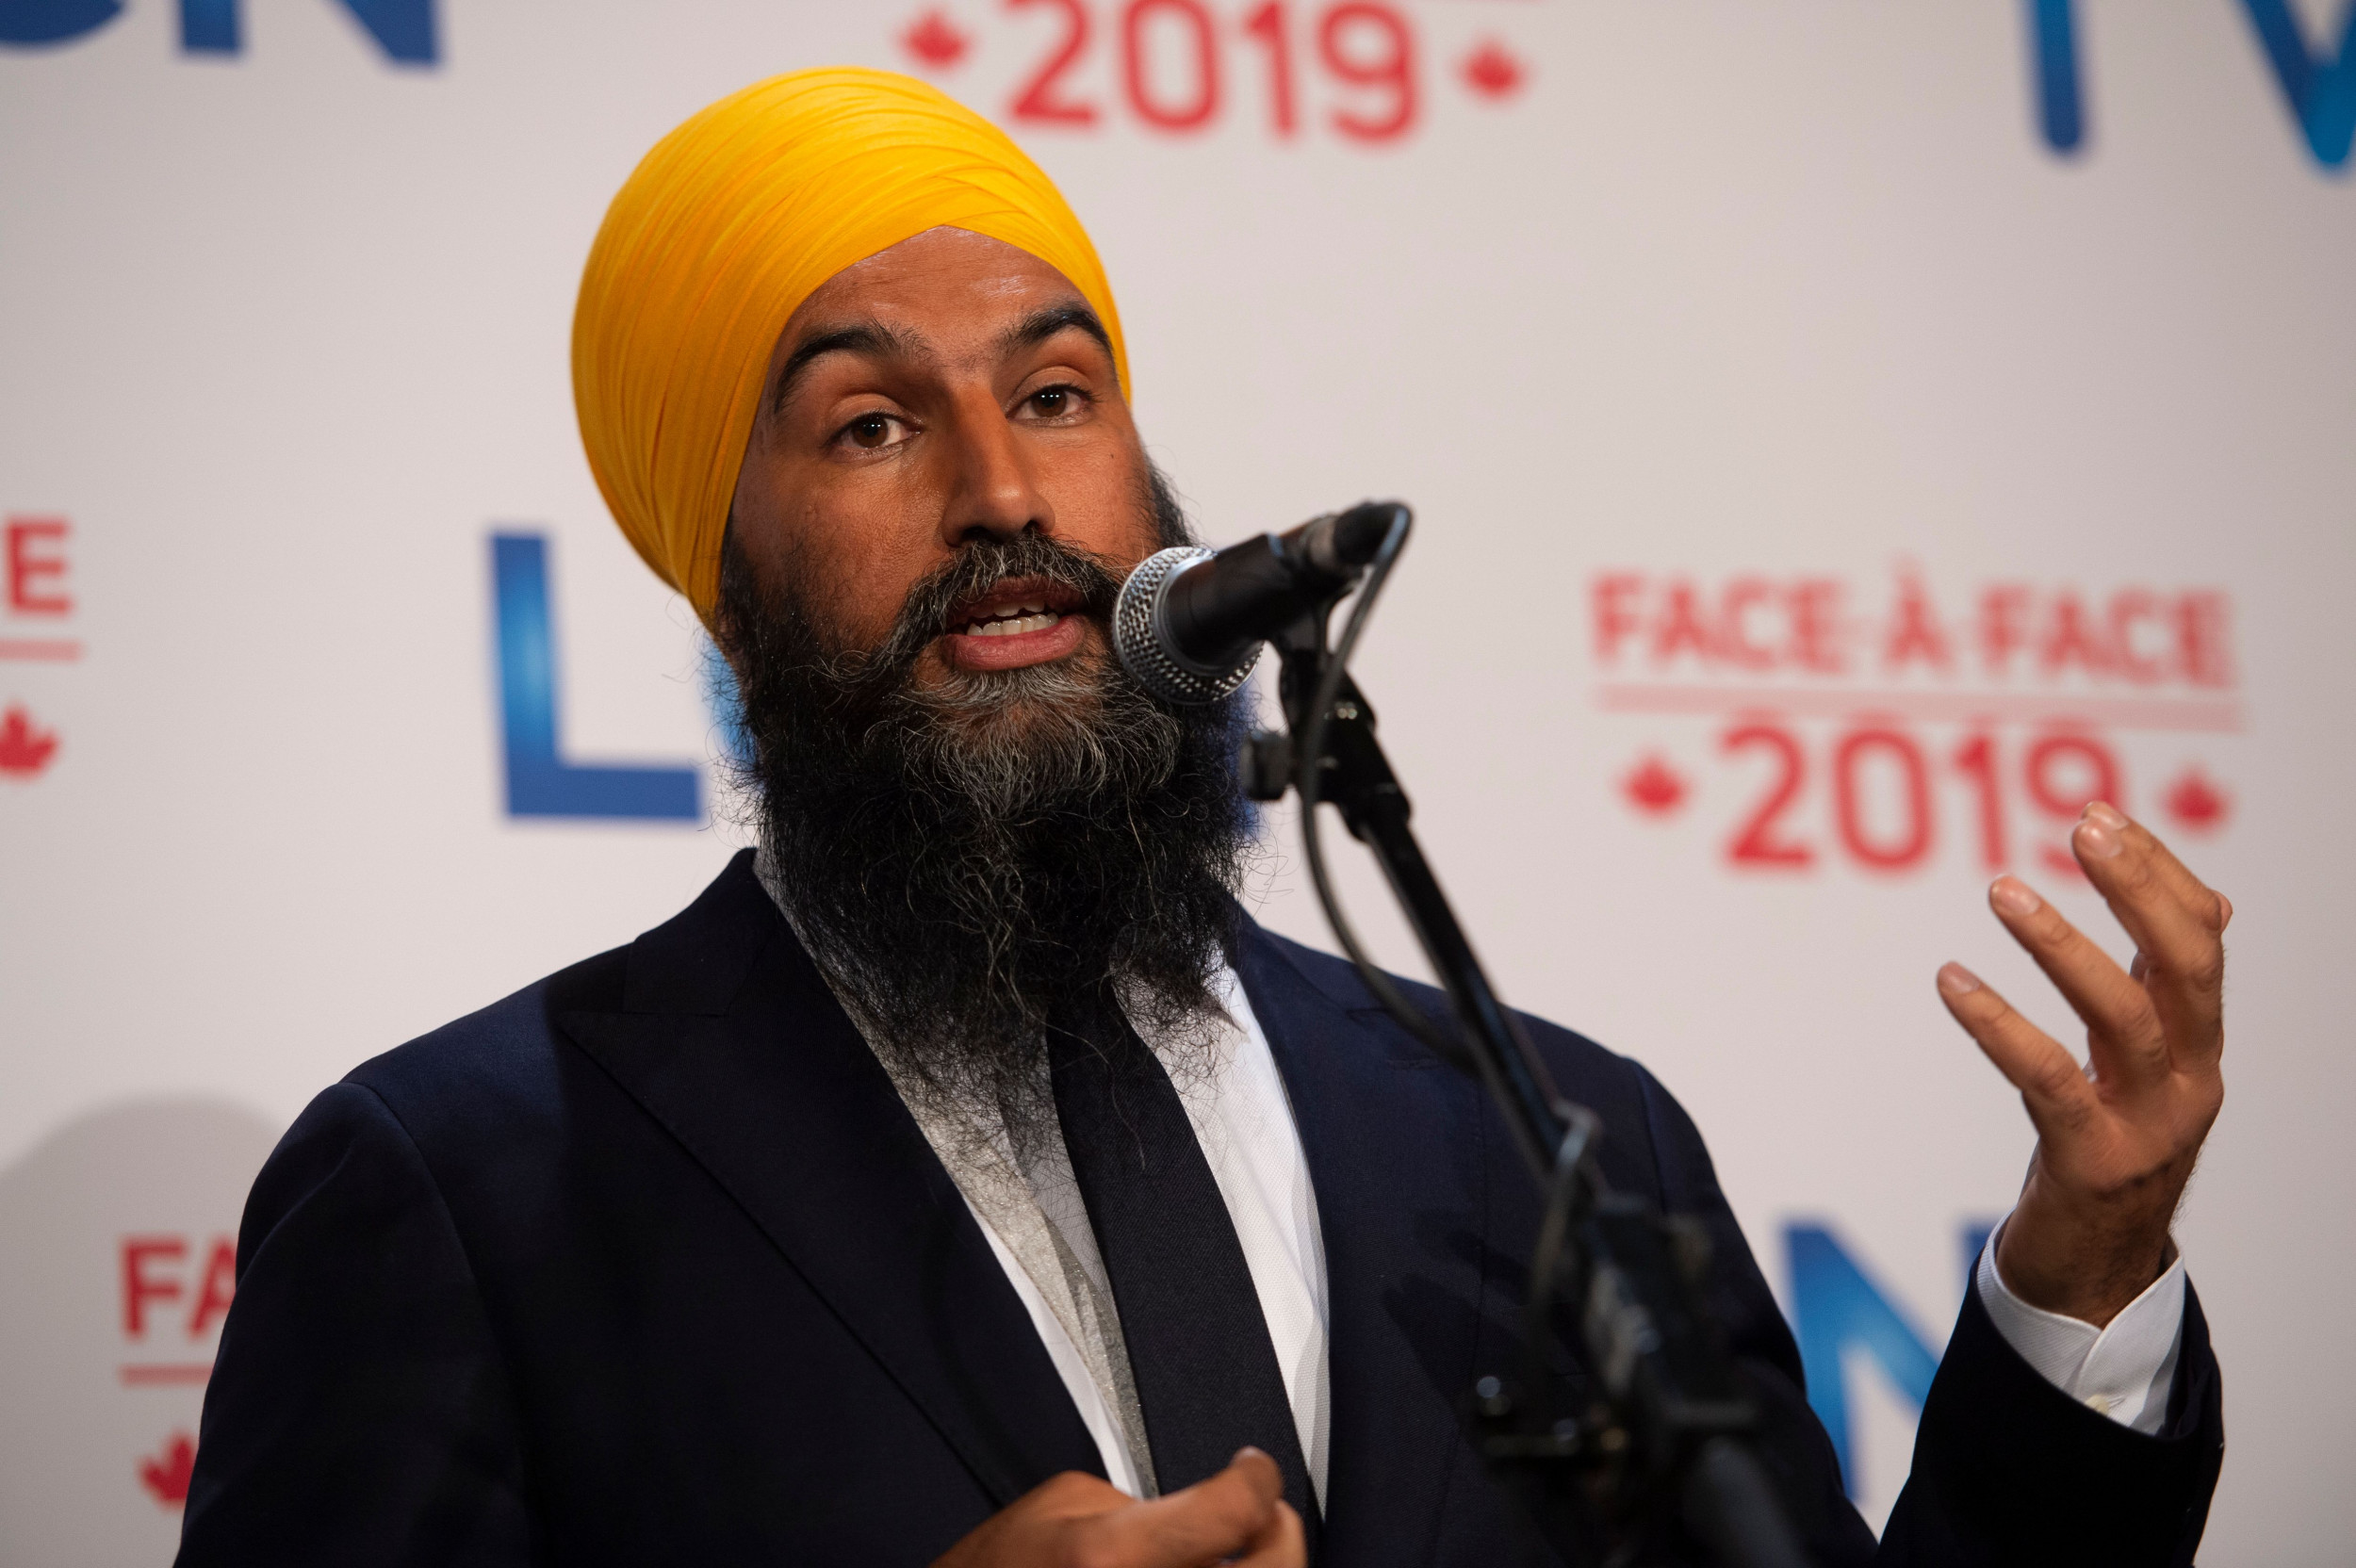 Justin Trudeau S Rival Jagmeet Singh Praised For Perfect Response After Being Told To Cut Your Turban Off To Look Canadian